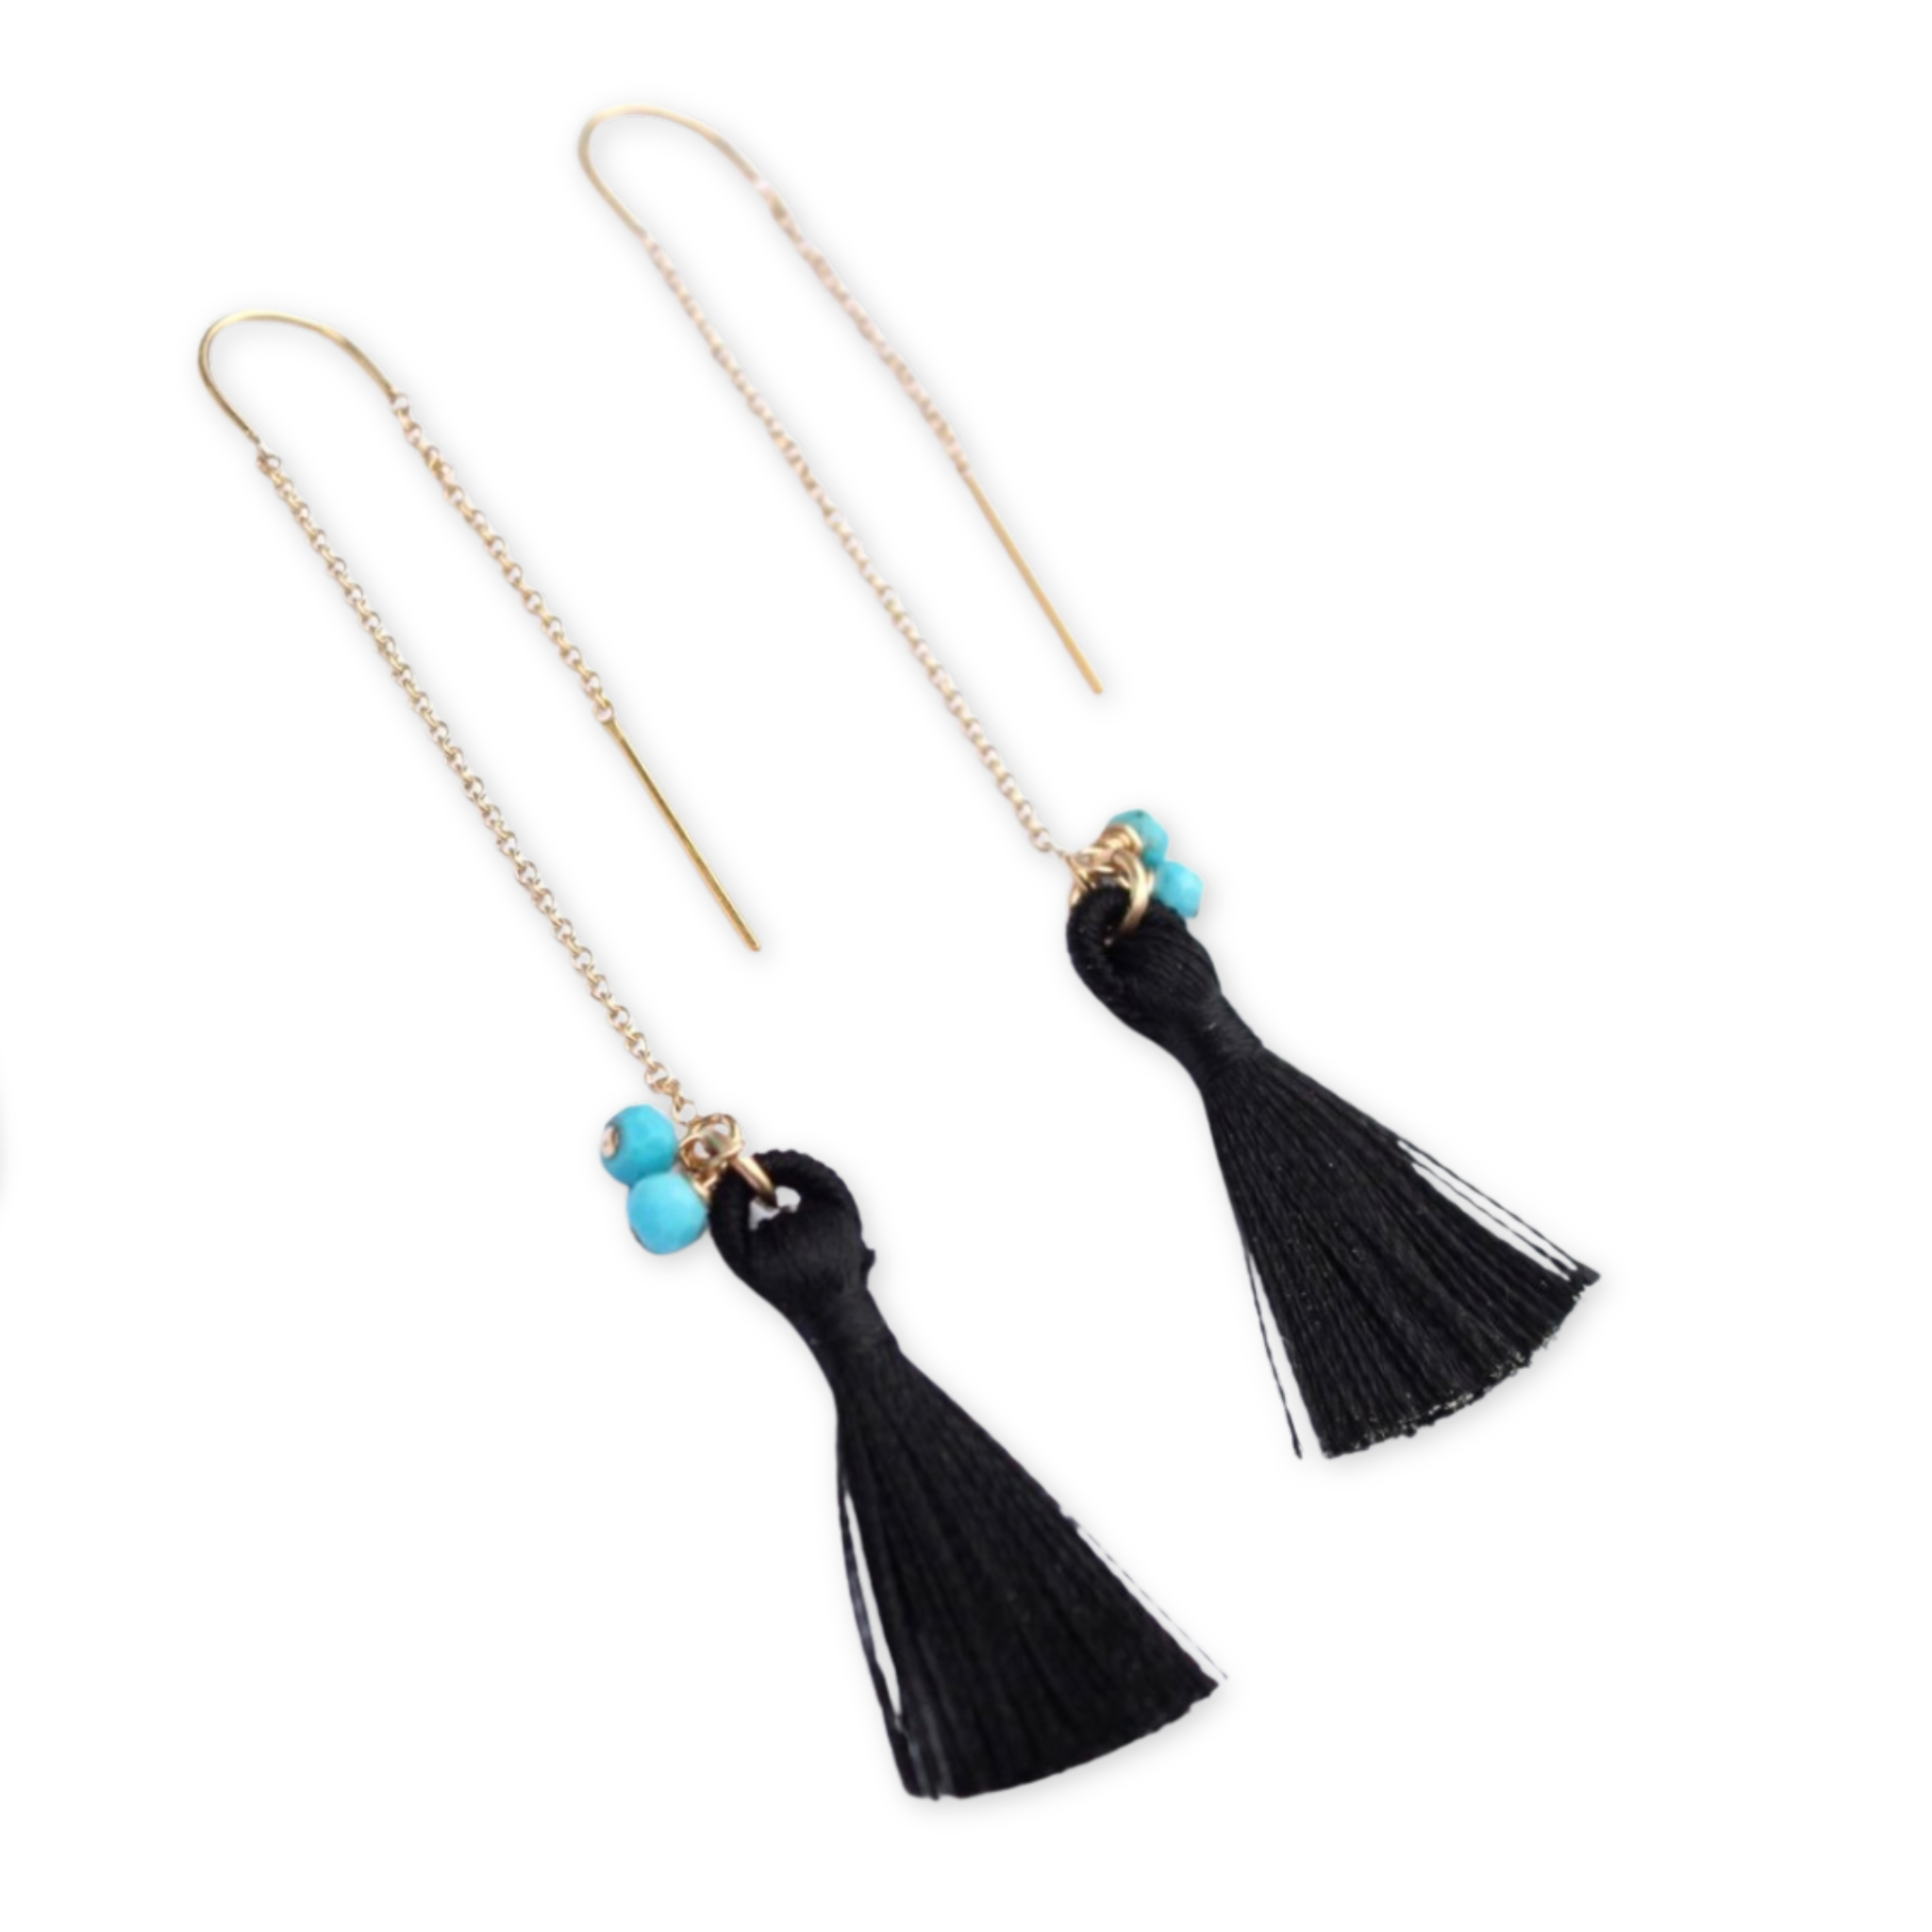 ear threaders with black tassels and turquoise beads hanging on delicate chains